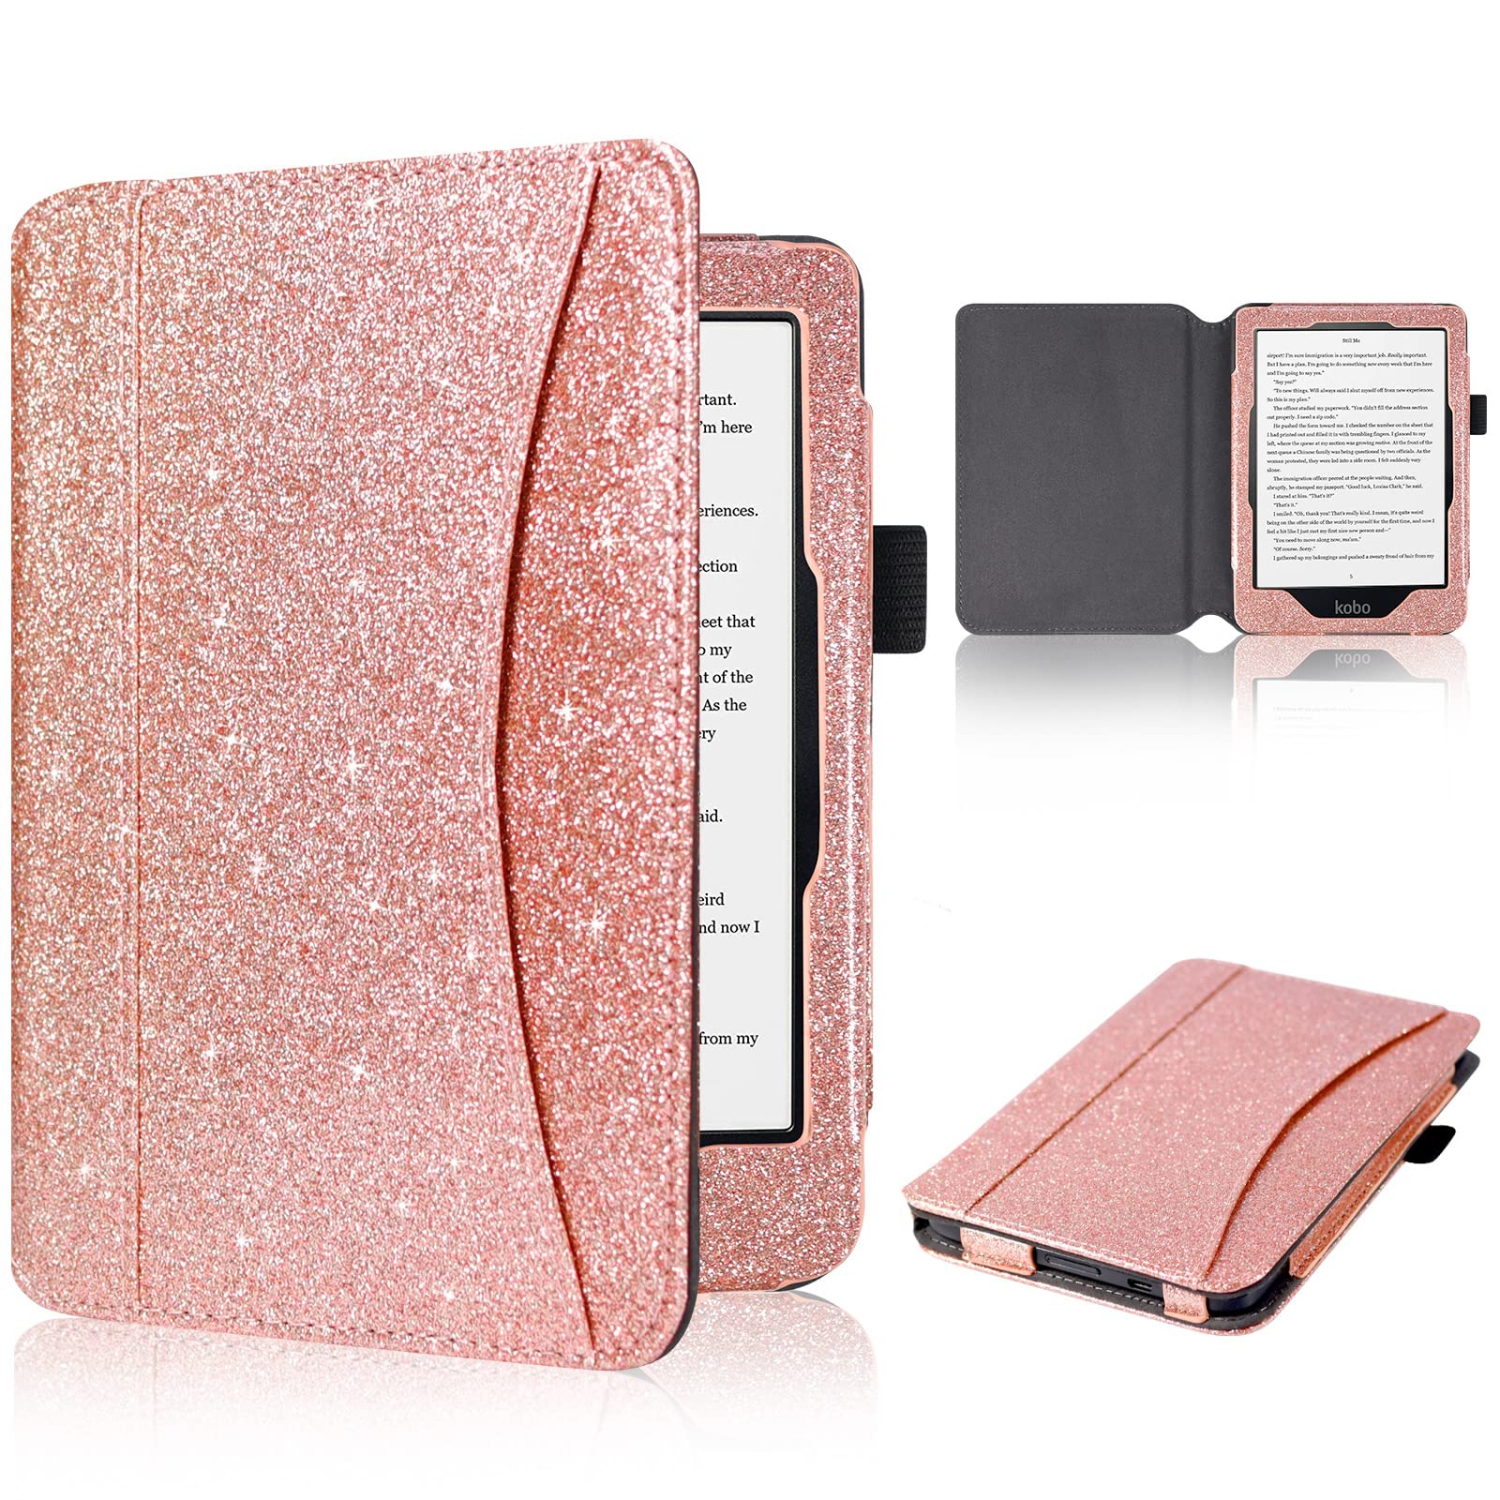 Baby Pink Kobo Ereader Clara HD Case Gylint Premium Leather Business Slim Folding Stand Folio Cover with Auto Wake/Sleep Multiple Viewing Angles for Kobo Ereader Clara HD 6.0i Tablet 